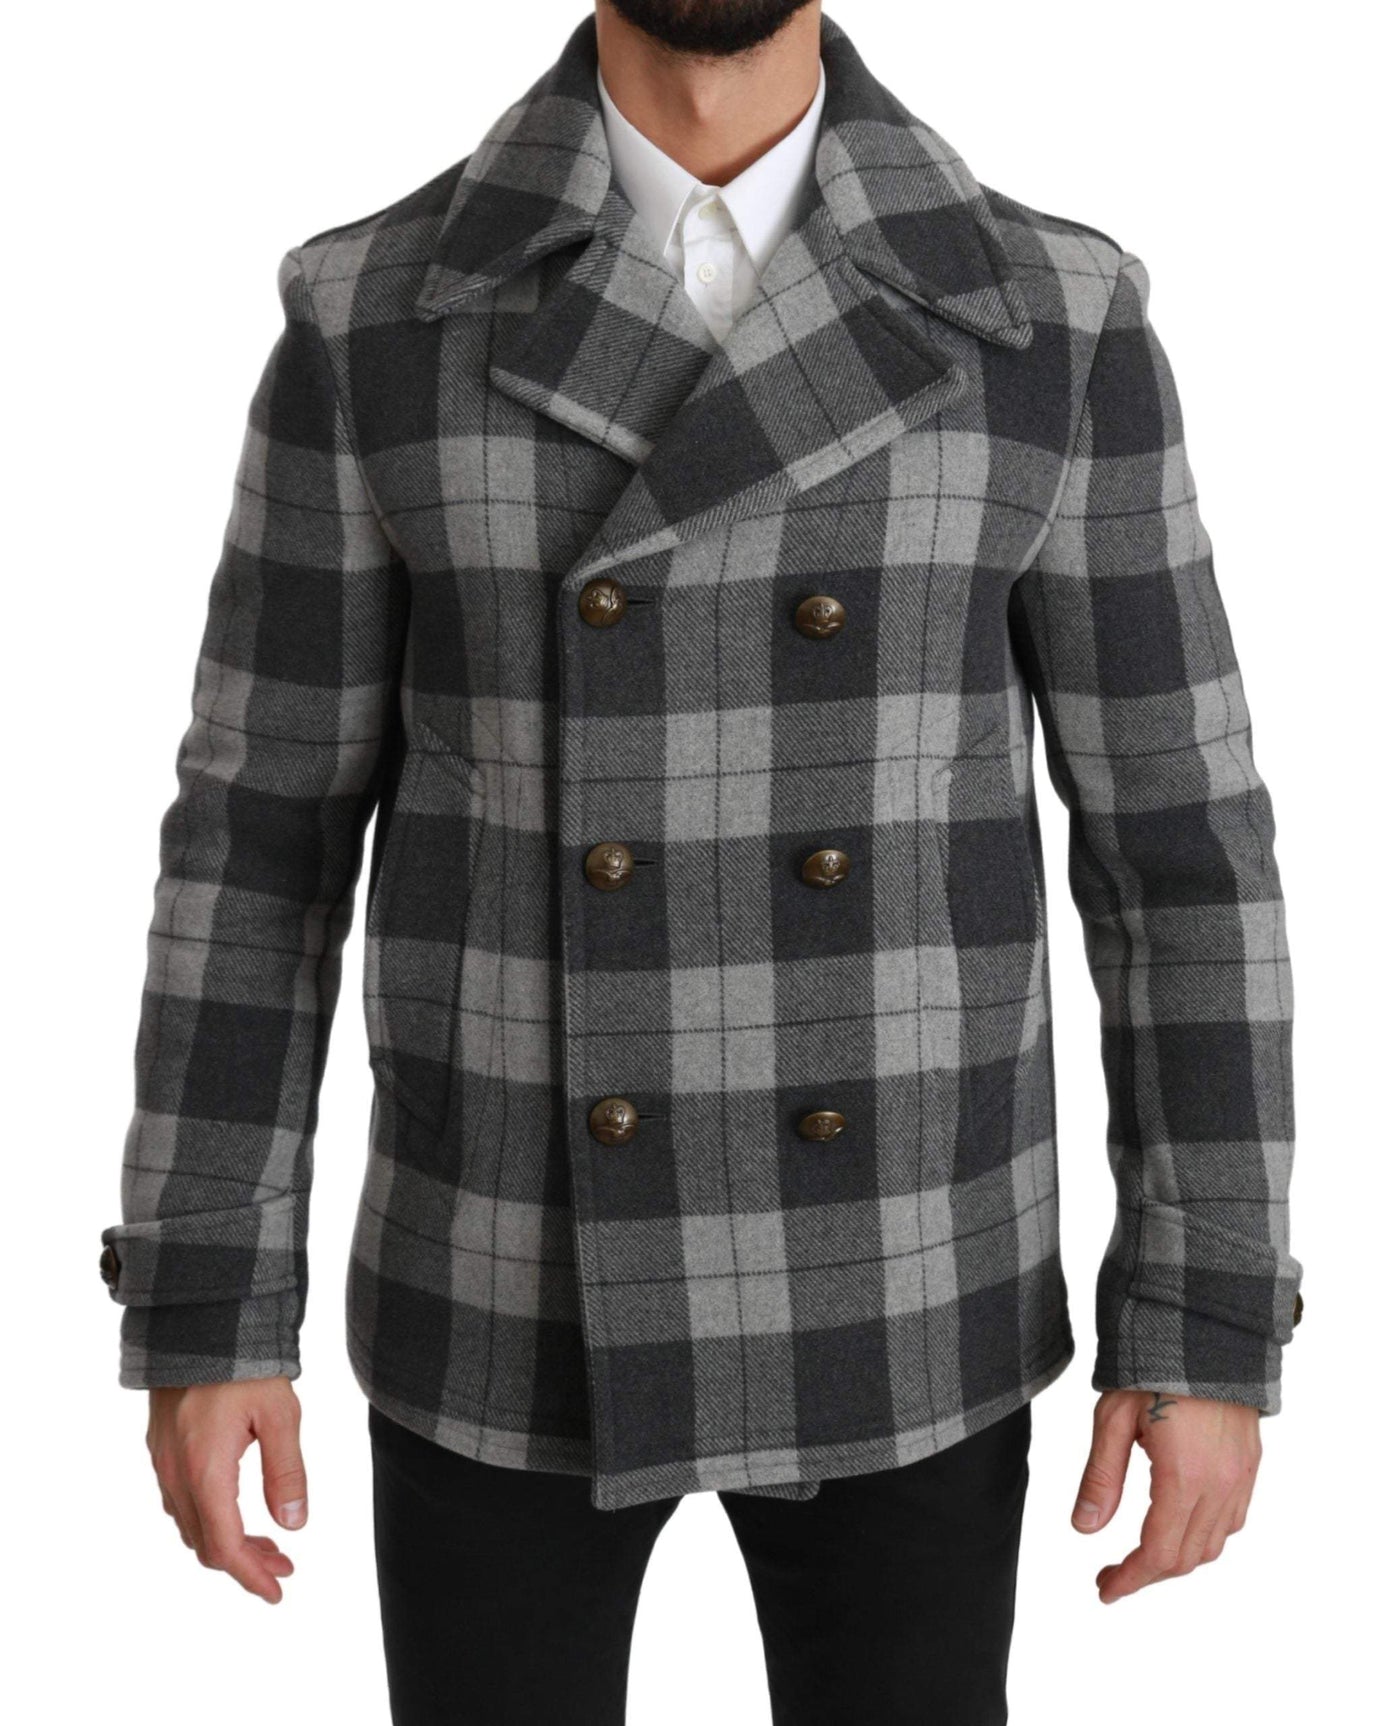 Dolce & Gabbana  Gray Check Wool Cashmere Coat Jacket #men, Brand_Dolce & Gabbana, Catch, Dolce & Gabbana, feed-agegroup-adult, feed-color-gray, feed-gender-male, feed-size-IT50 | L, Gender_Men, Gray, IT44 | XS, IT46 | S, IT48 | M, IT50 | L, IT52 | XL, Jackets - Men - Clothing, Kogan, Men - New Arrivals at SEYMAYKA